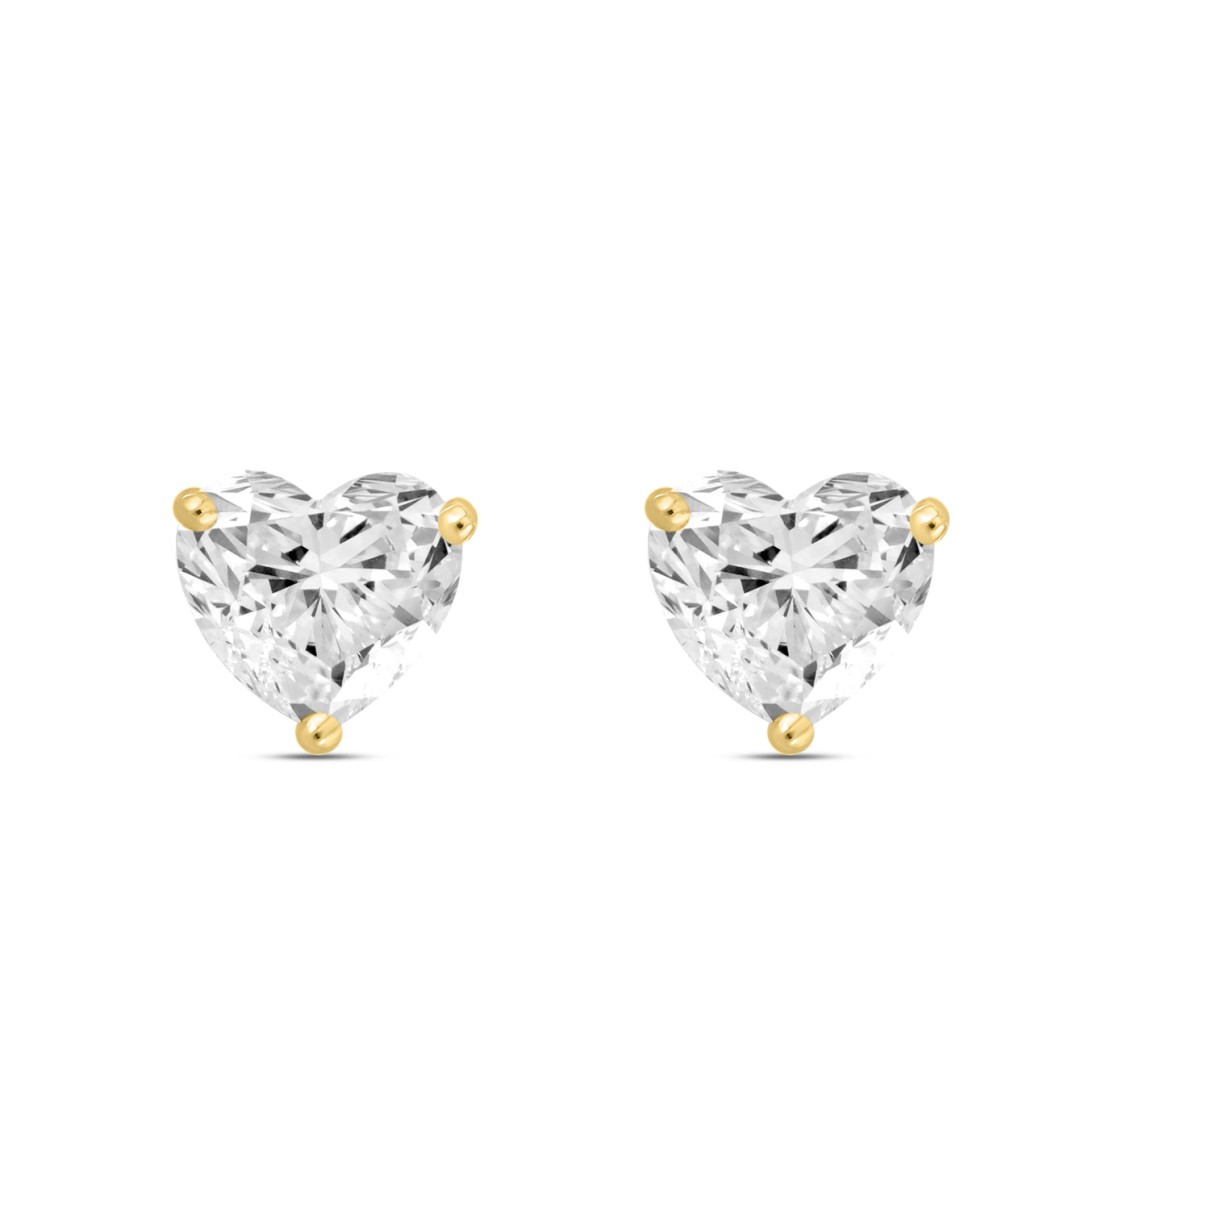 LADIES SOLITAIRE EARRINGS 3CT HEART DIAMOND 14K YELLOW GOLD 